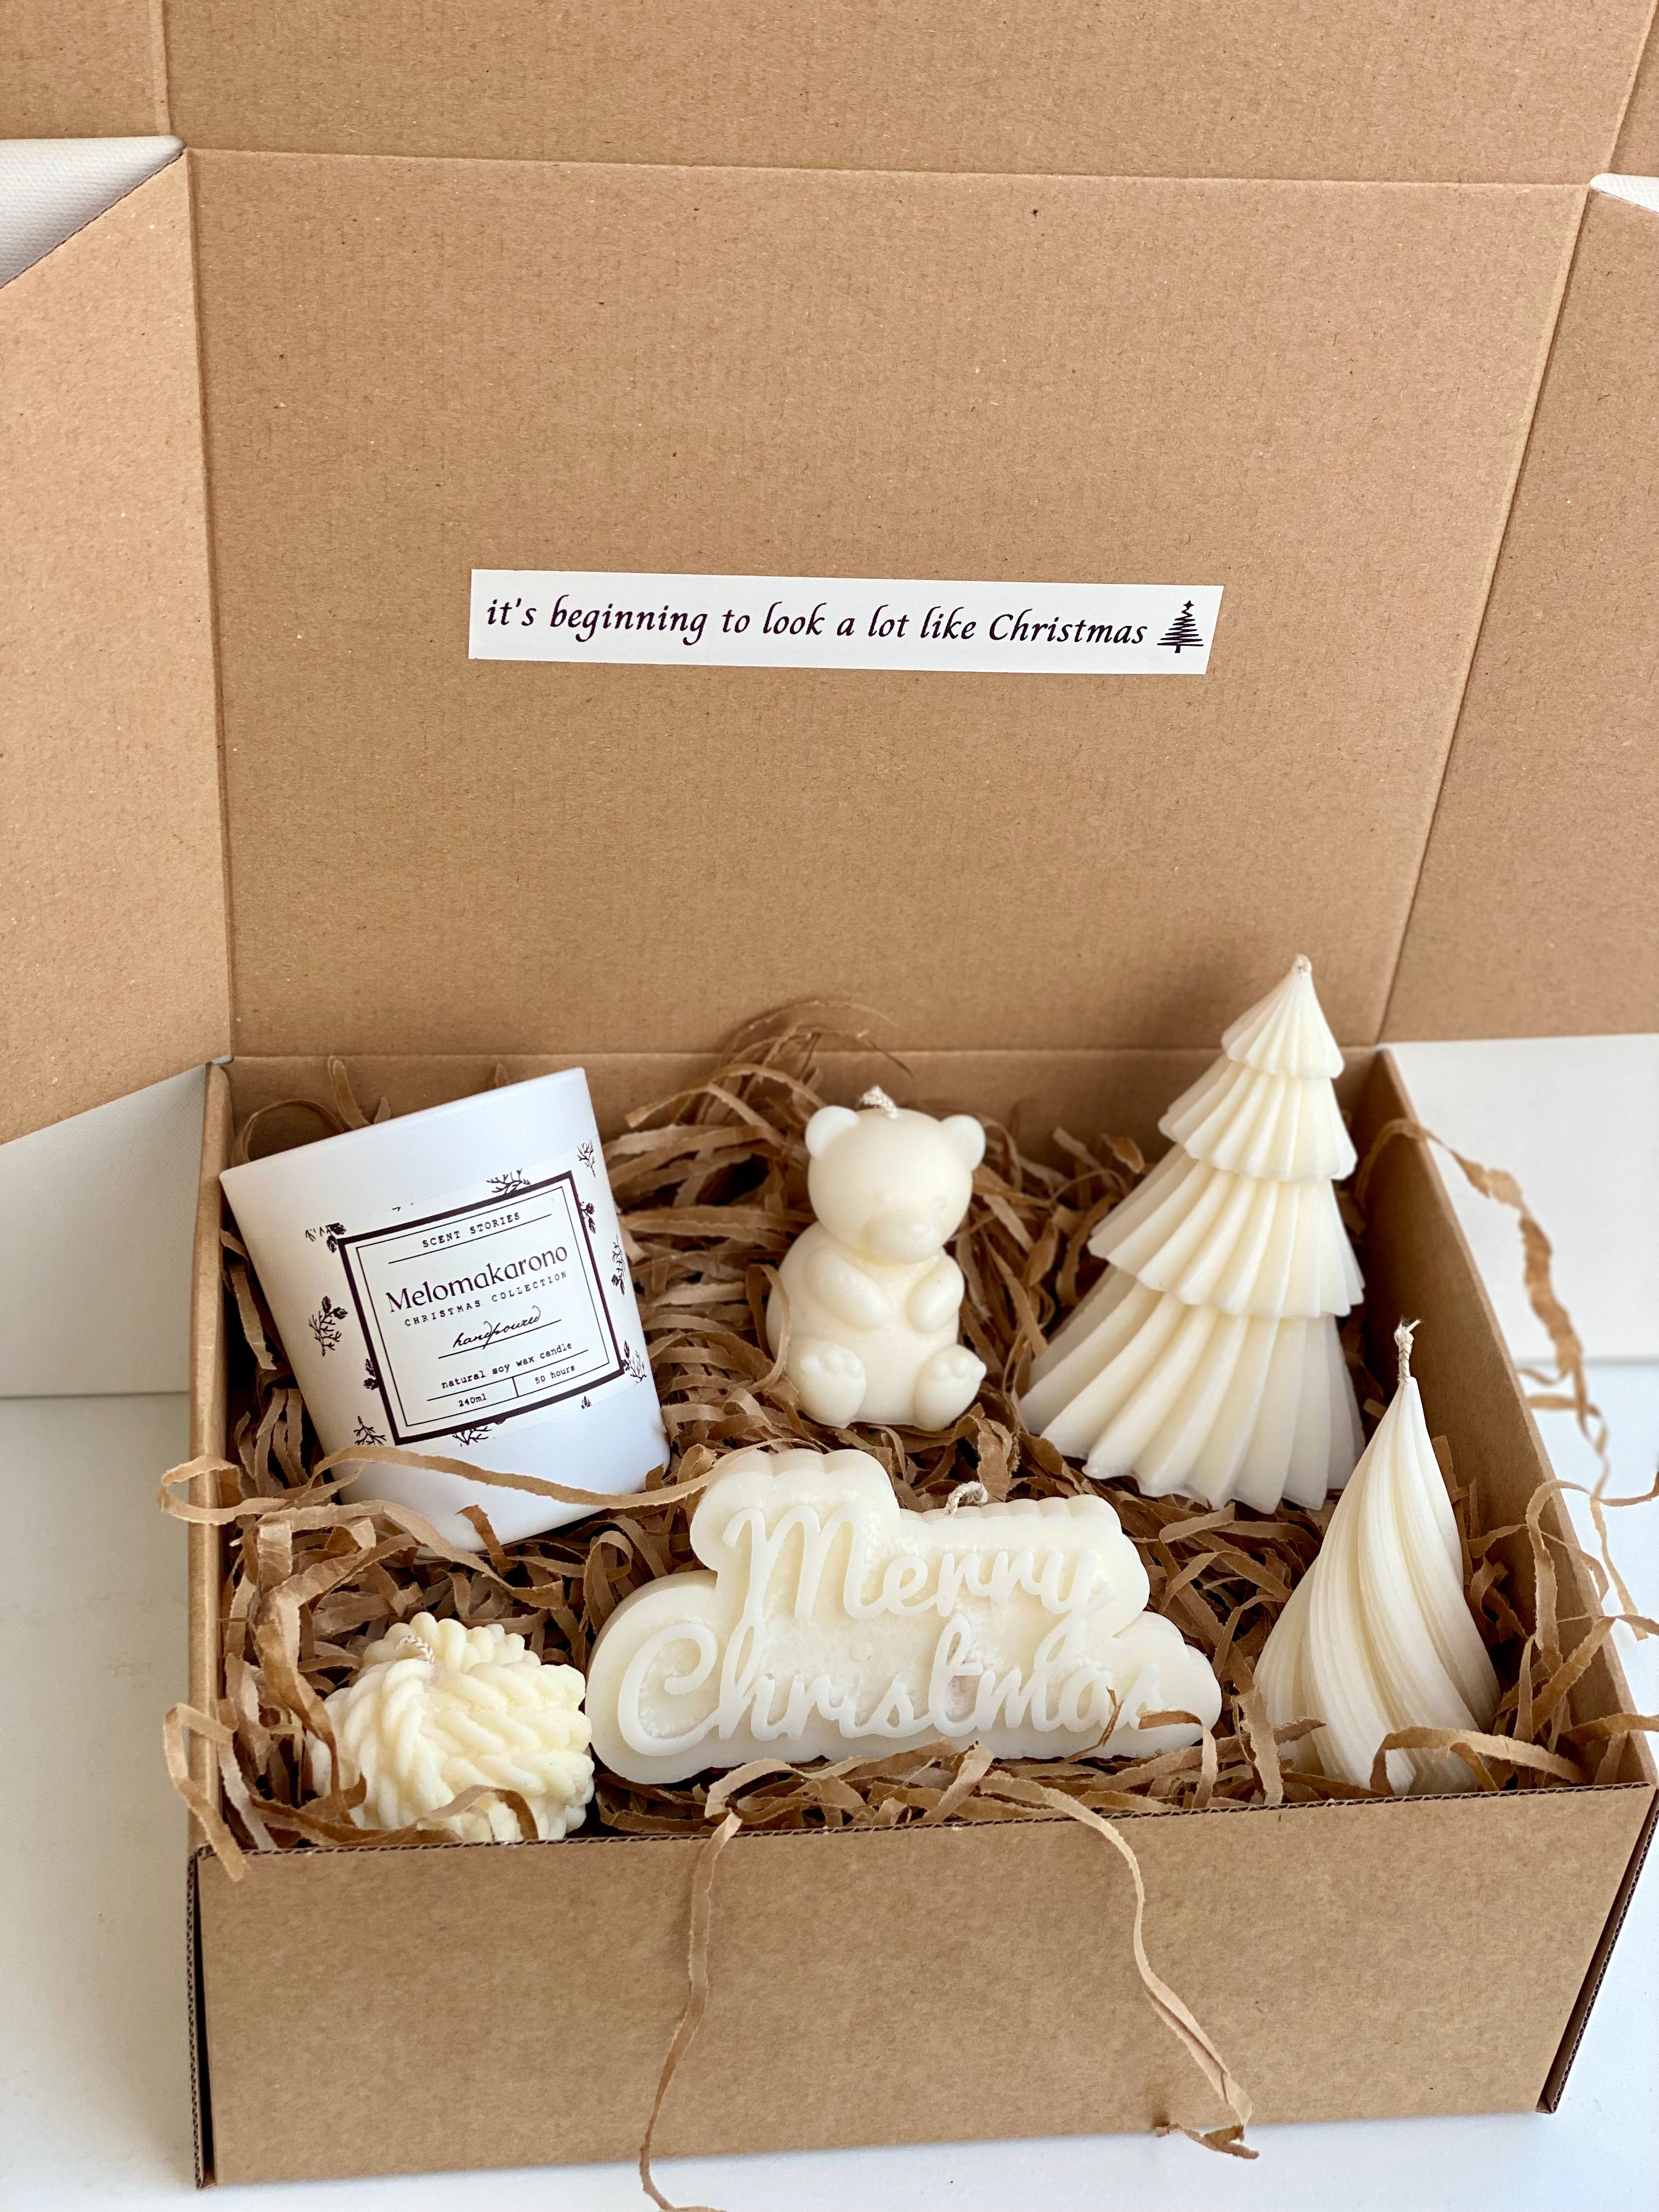 Christmas lover box - Scent Stories